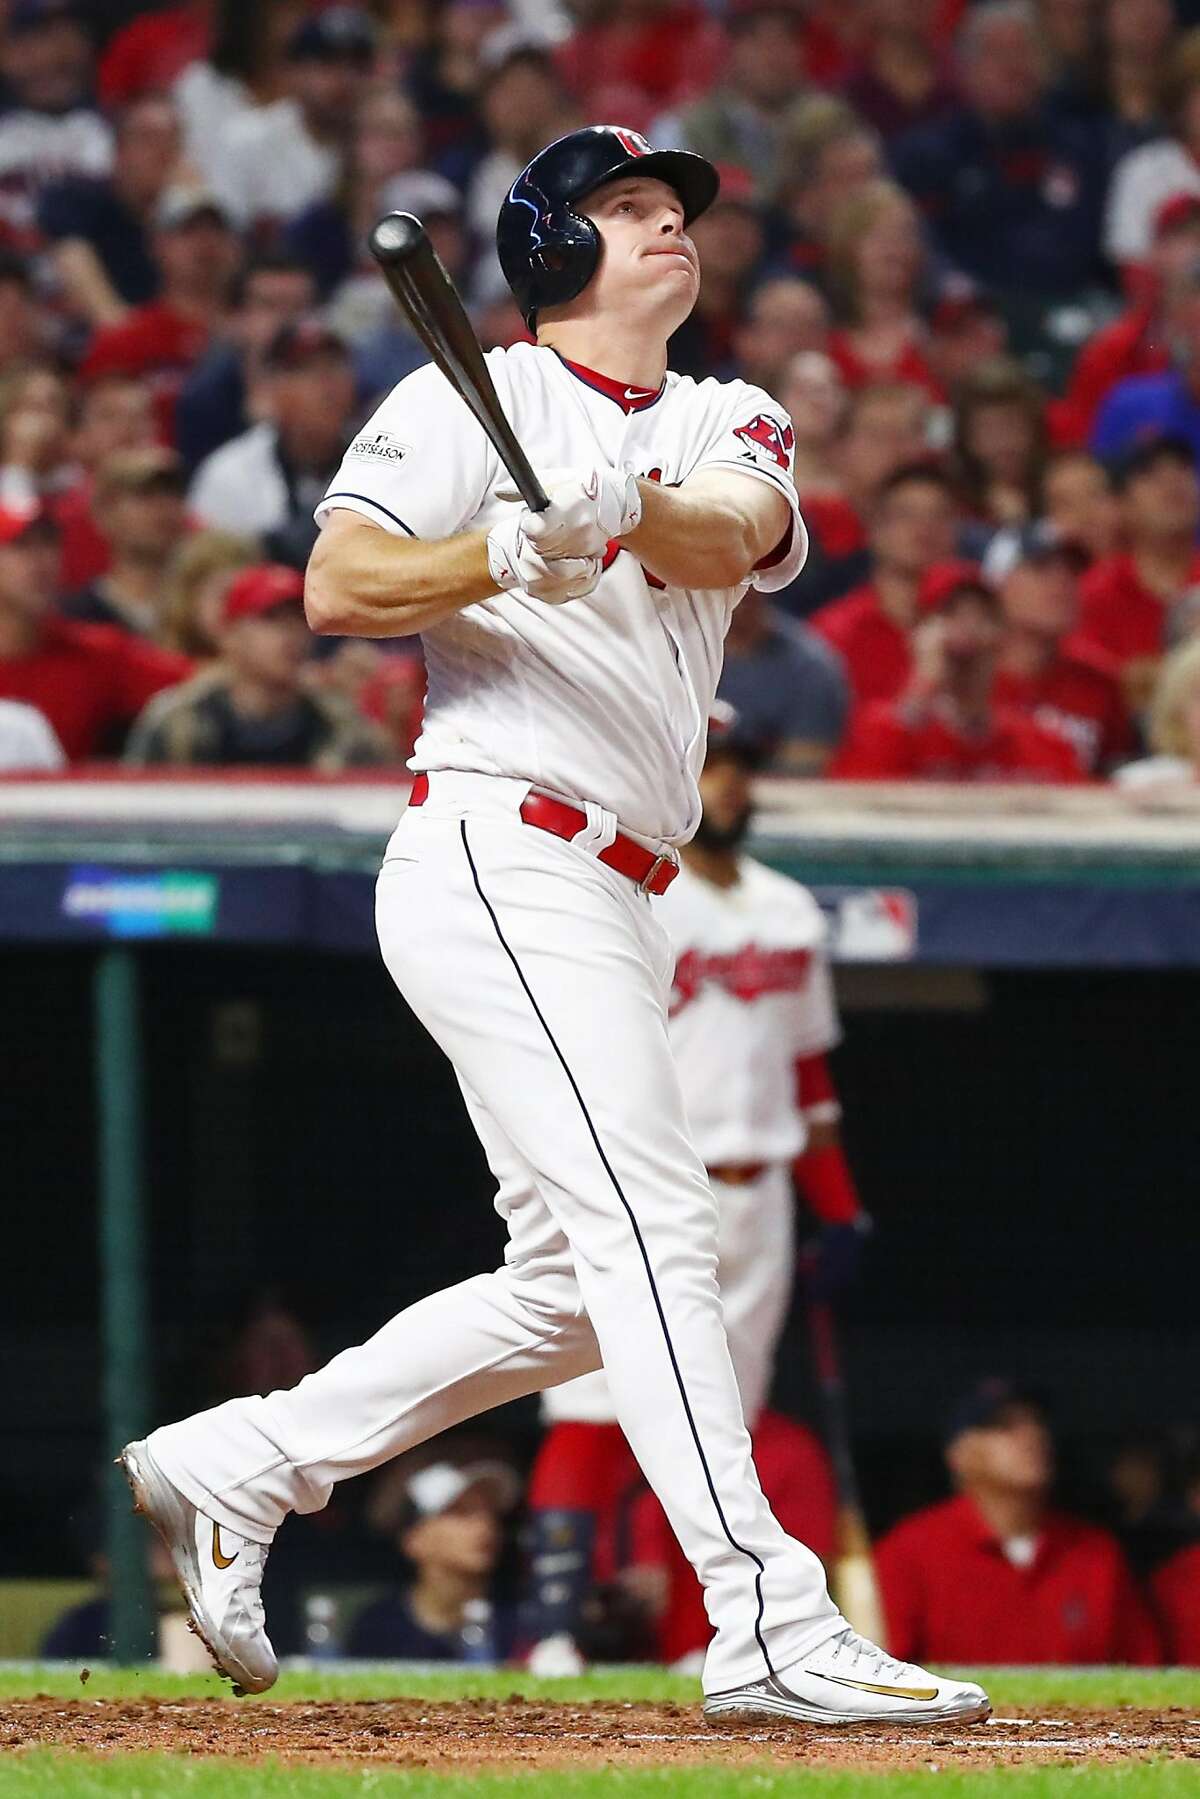 CLEVELAND, OH - OCTOBER 05: Jay Bruce #32 of the Cleveland Indians hits a two-run home run during the fourth inning against the New York Yankees during game one of the American League Division Series at Progressive Field on October 5, 2017 in Cleveland, Ohio. (Photo by Gregory Shamus/Getty Images)